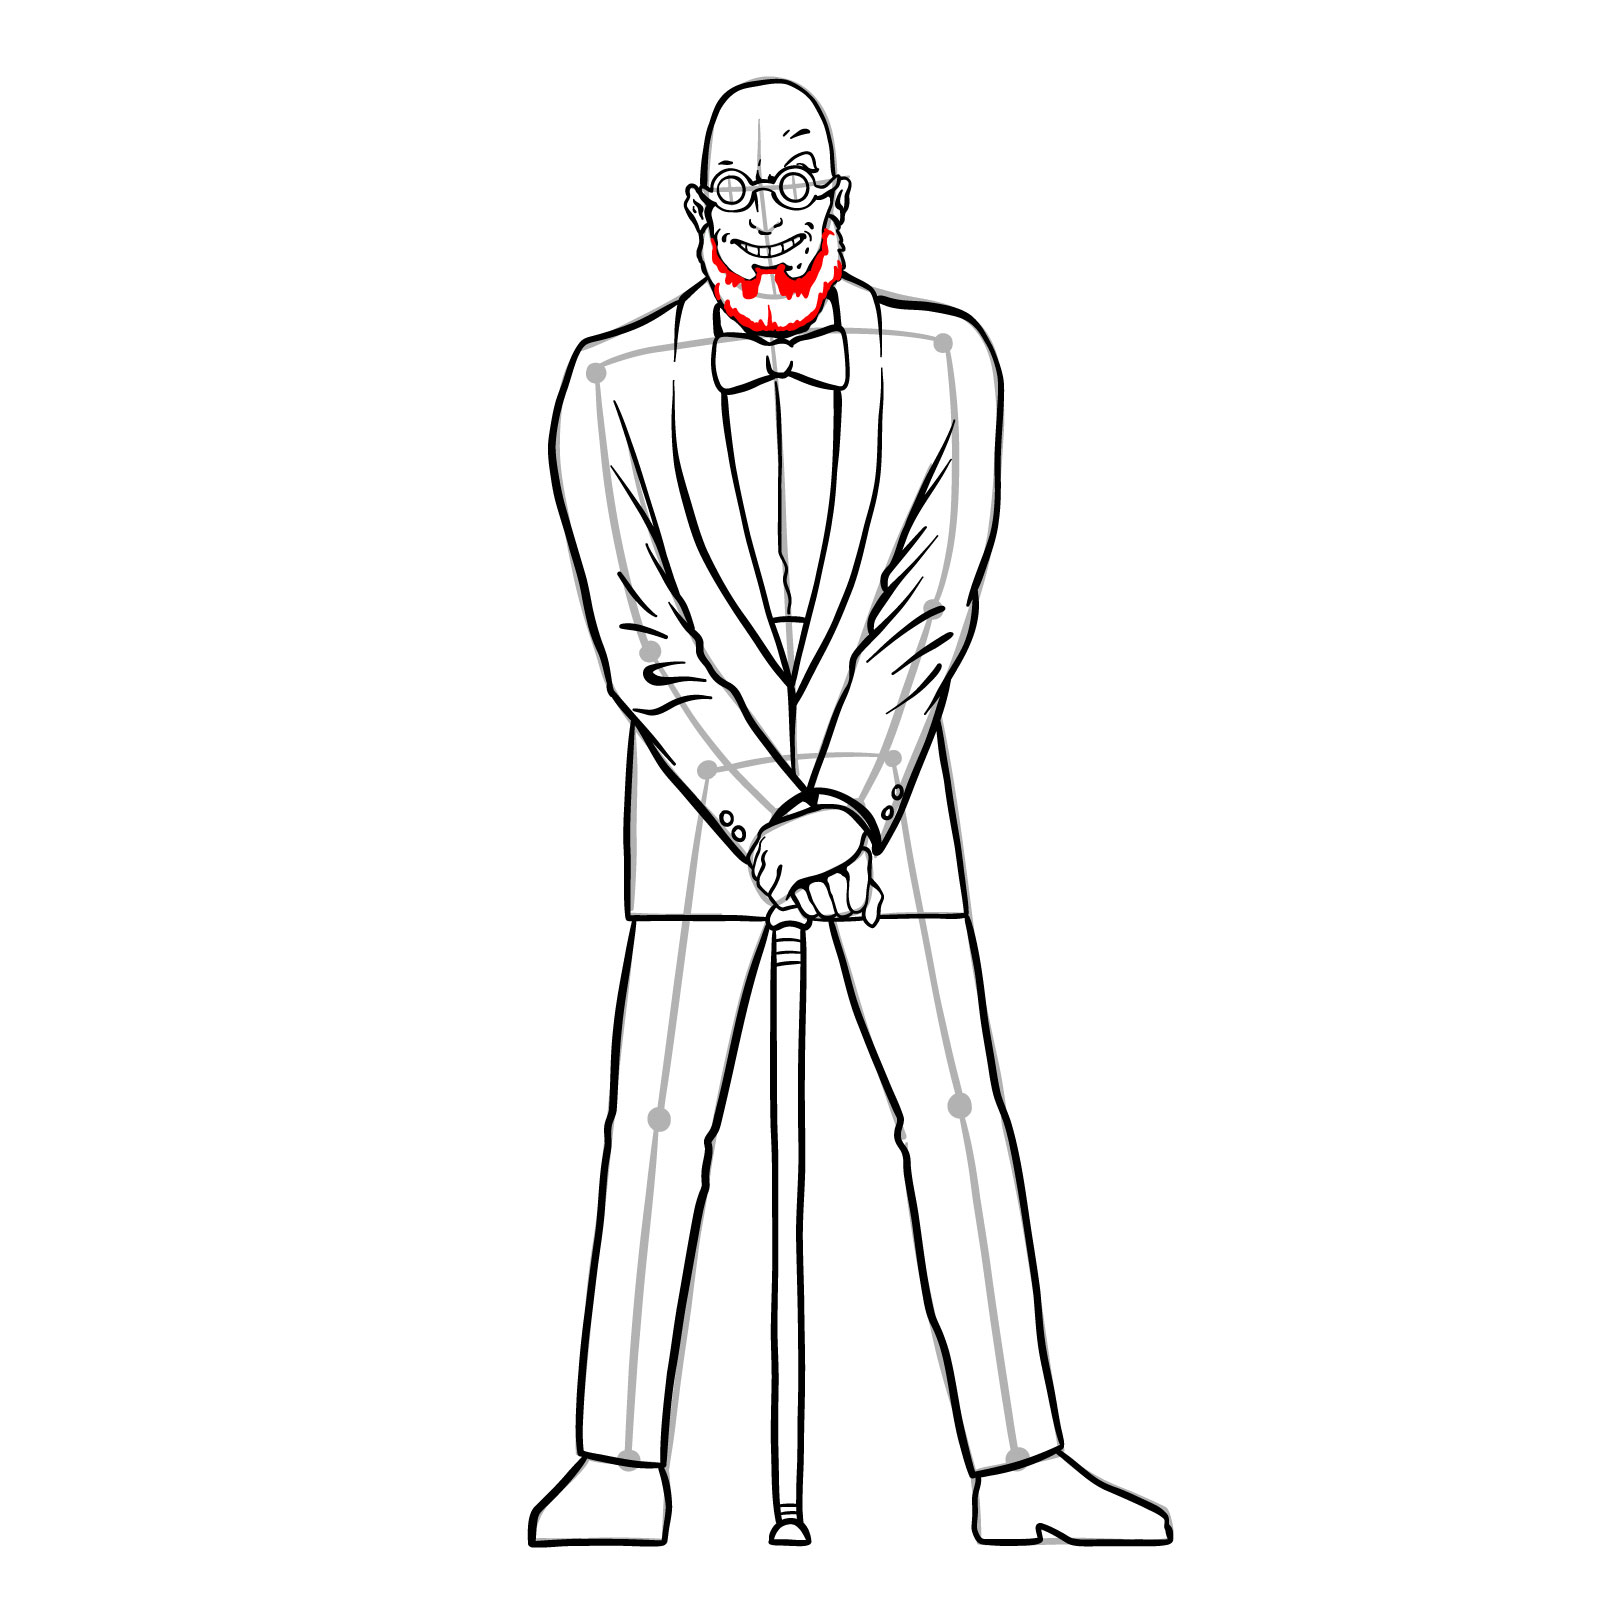 How to draw Dr. Hugo Strange from DC Comics - step 31